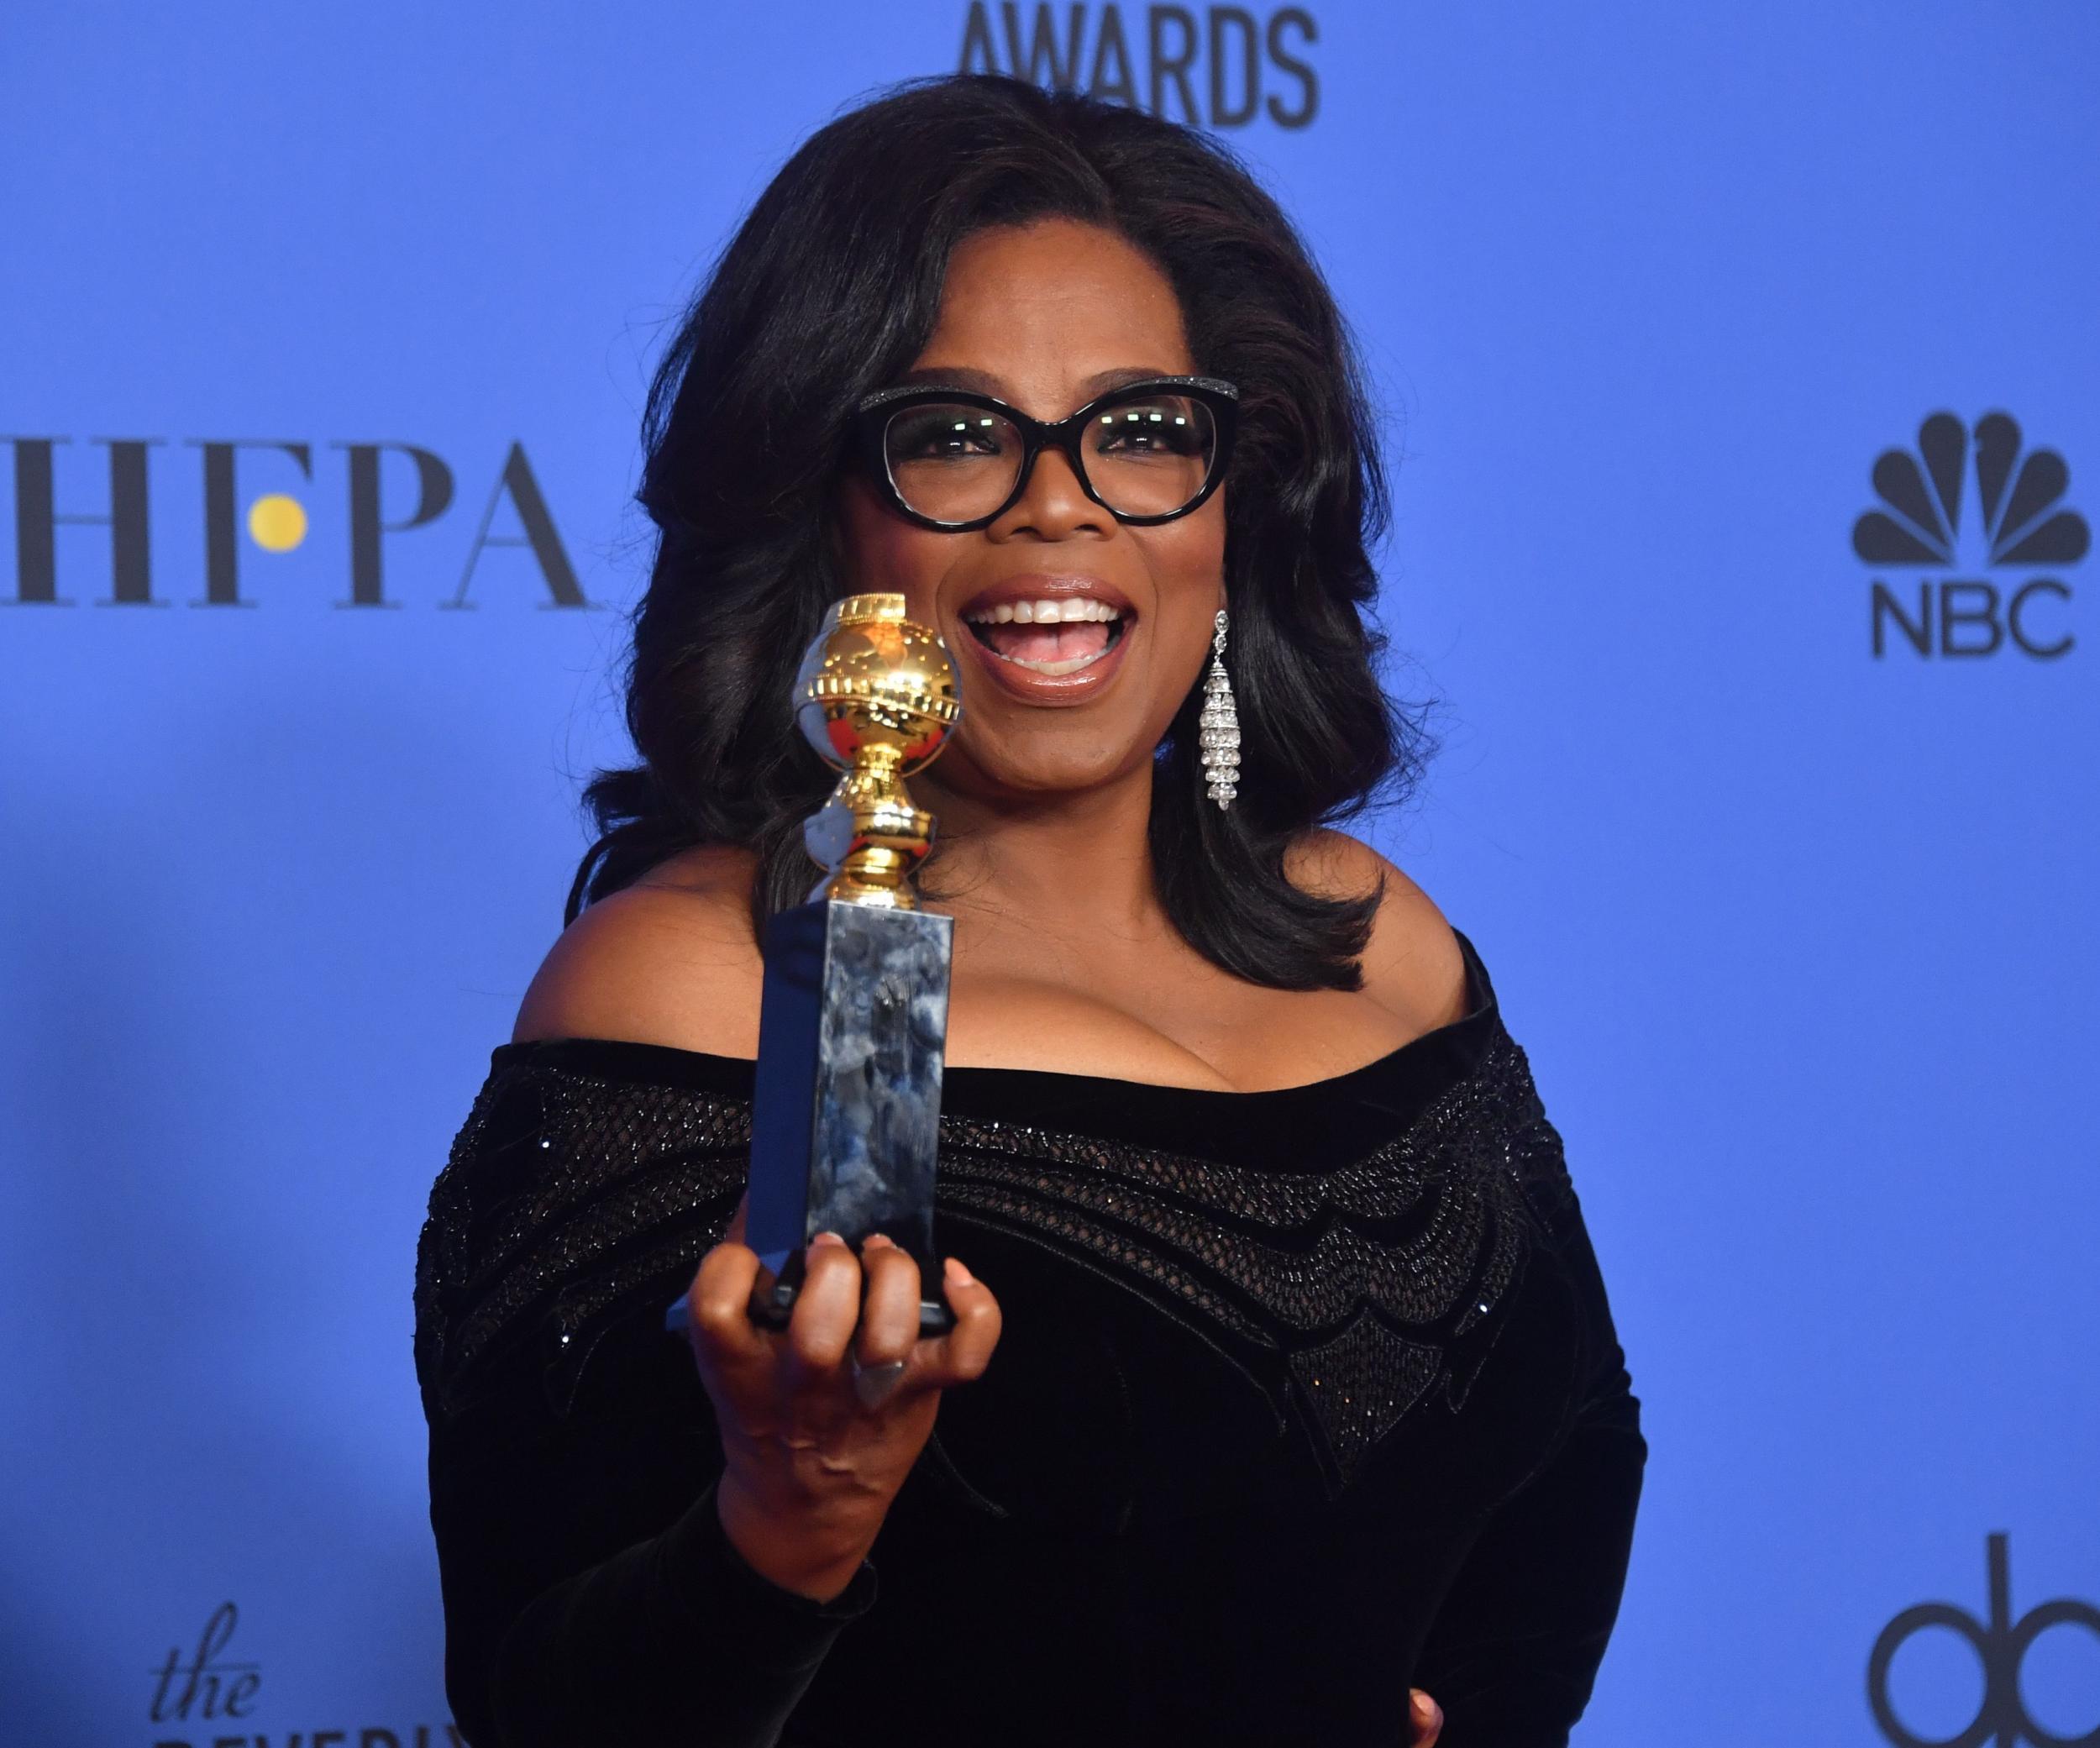 Oprah Winfrey delivered one of the most powerful and iconic speeches at the Golden Globes Awards last night after she became the first black woman to be awarded the Cecil B DeMille Award